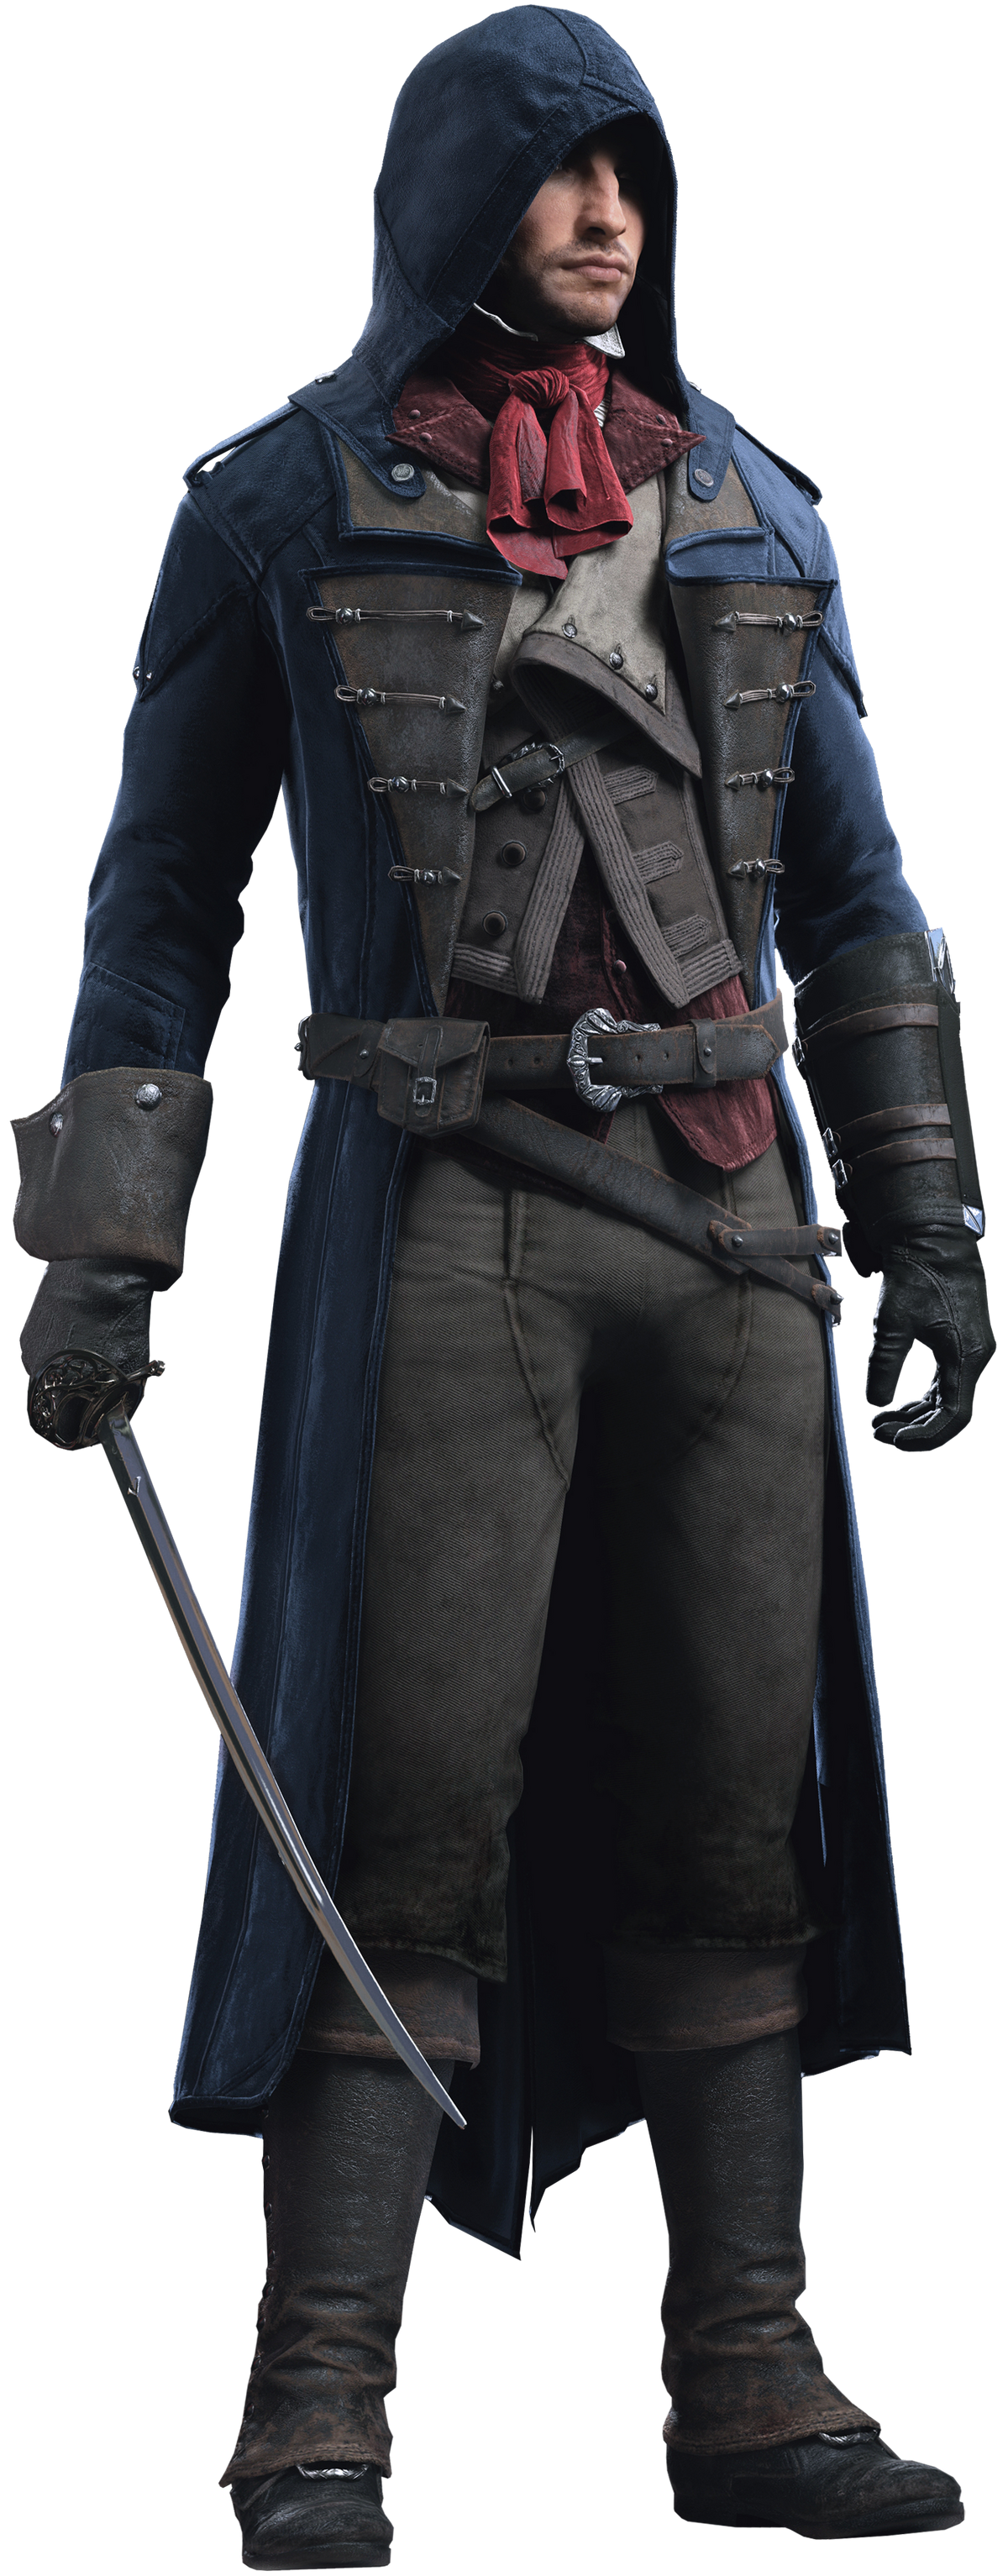 Independent, Assassin's Creed Wiki